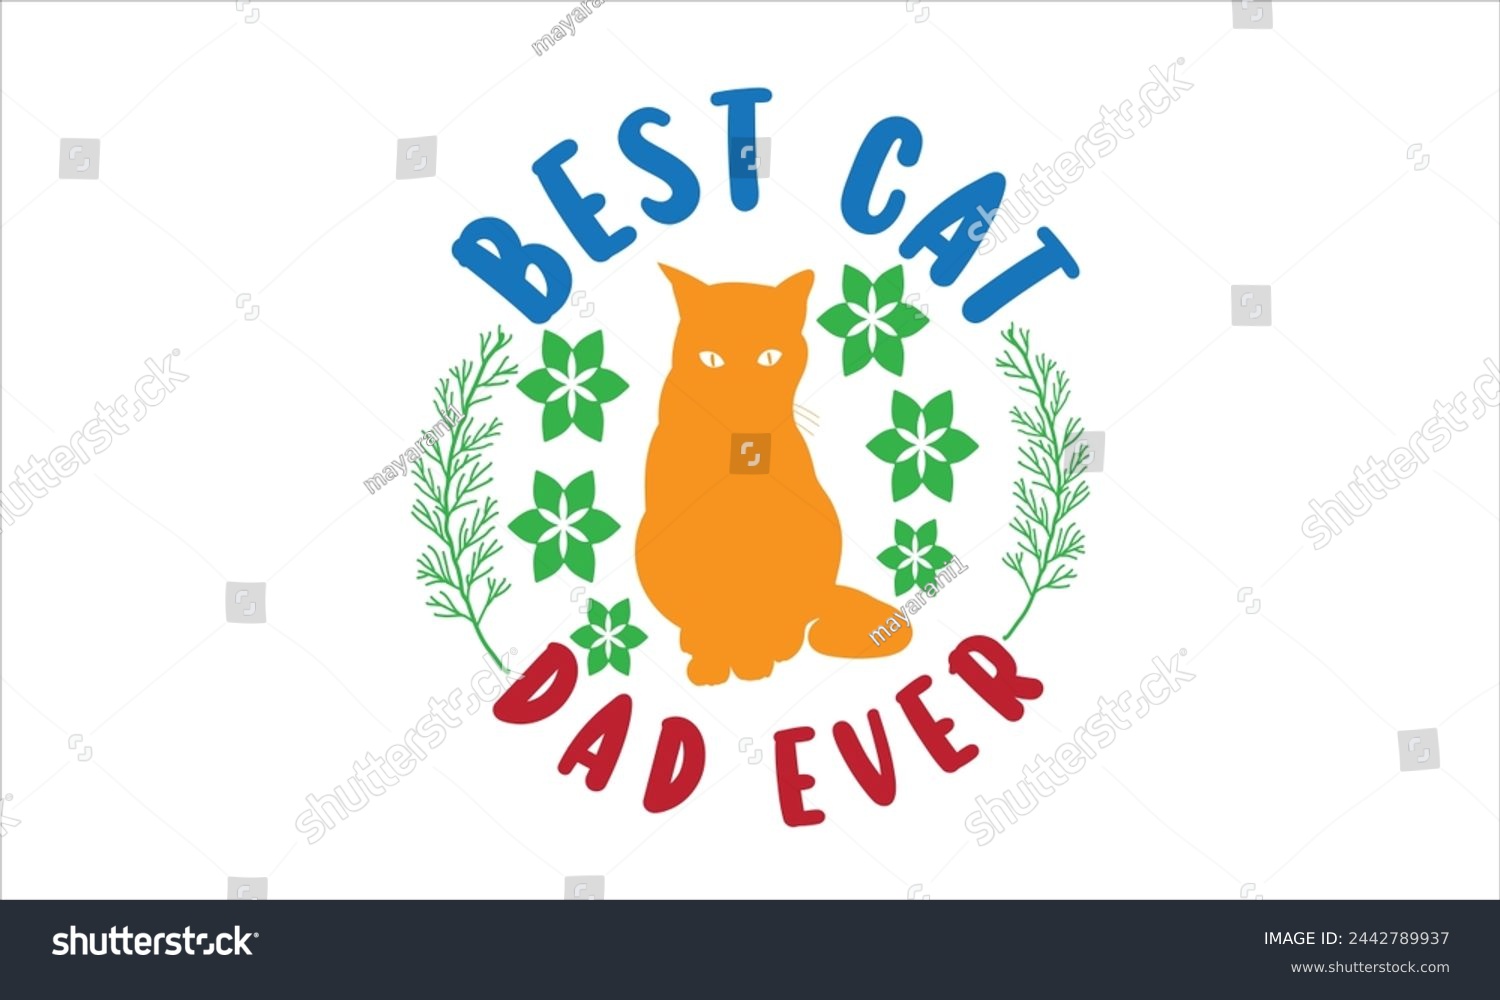 SVG of Cat Quotes Bundle, Cats Svg,funny Motivational typography t shirt design bundle,vector art,animal shirt,silhouette,png,eps,illustration isolated on white background,Lettering Illustration,Pet life,sti svg